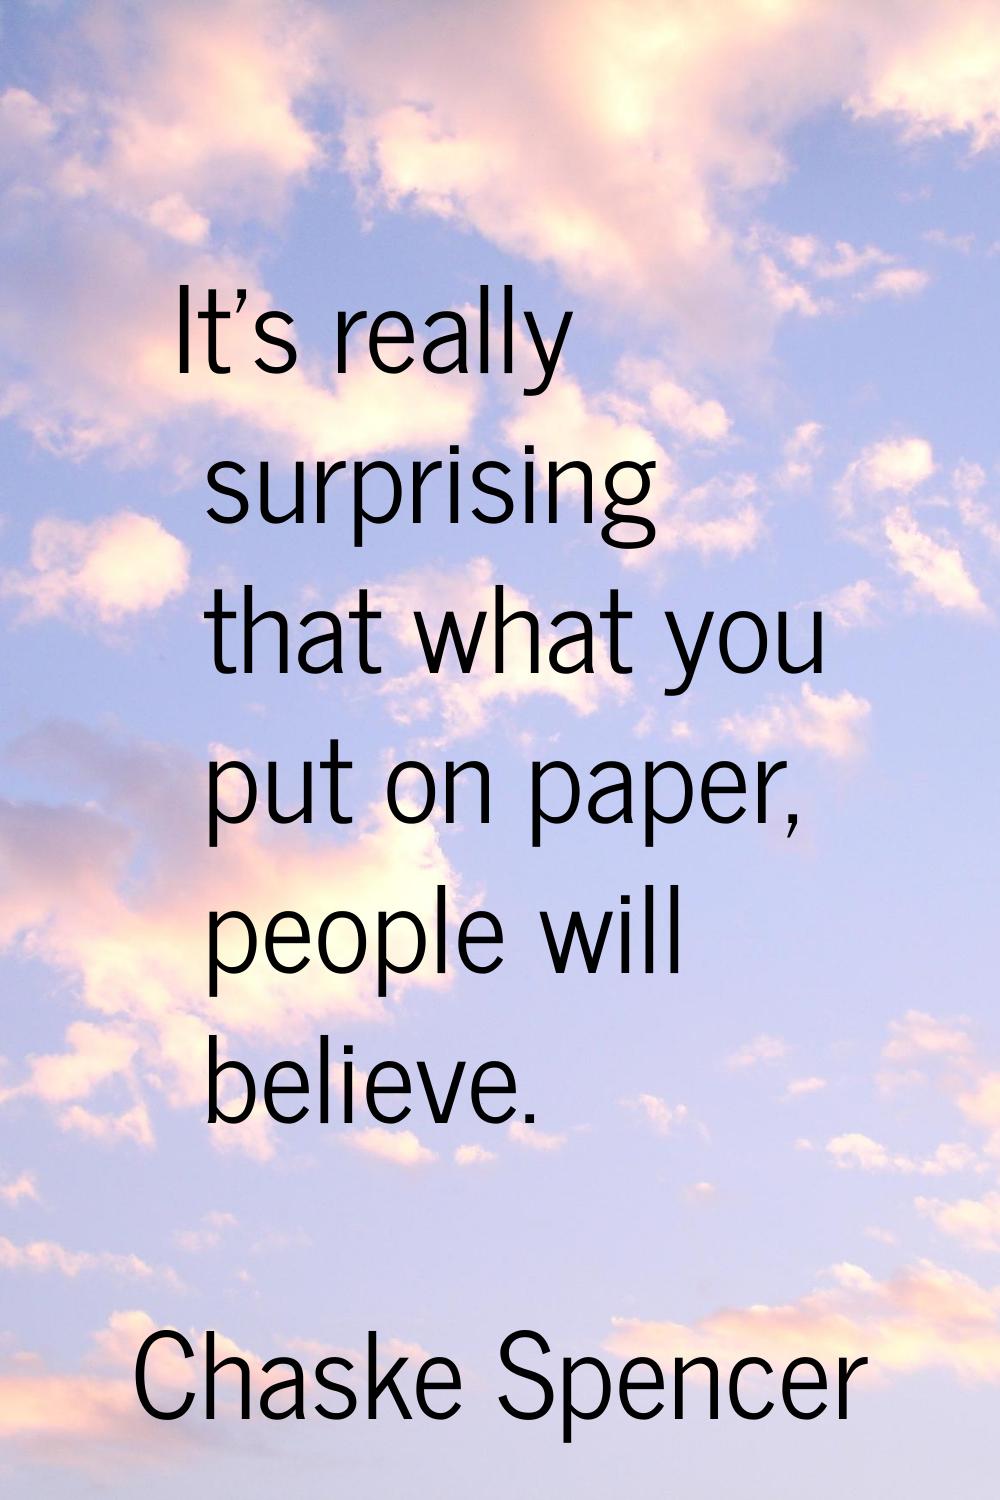 It's really surprising that what you put on paper, people will believe.